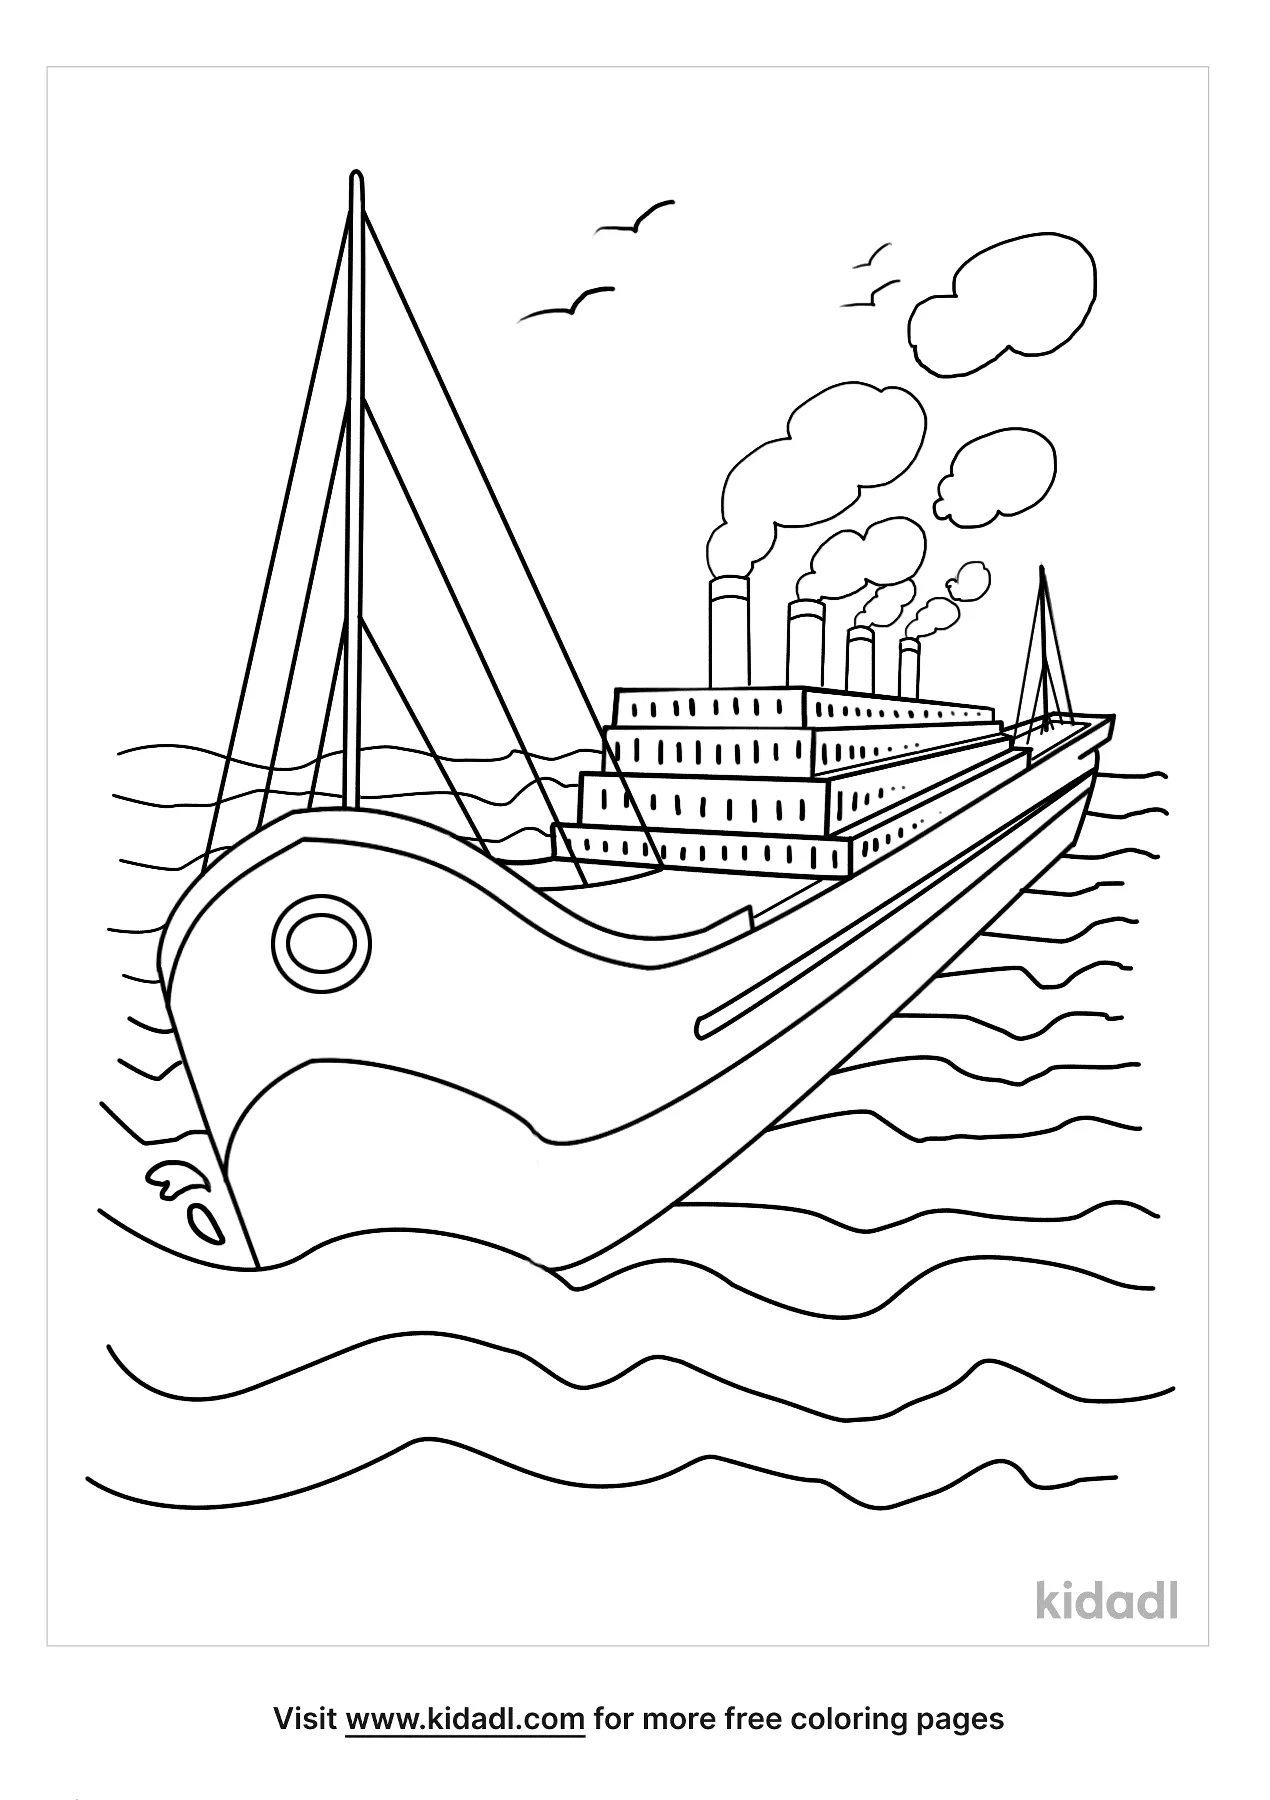 Titanic Coloring Pages   Free Vehicles Coloring Pages   Kidadl